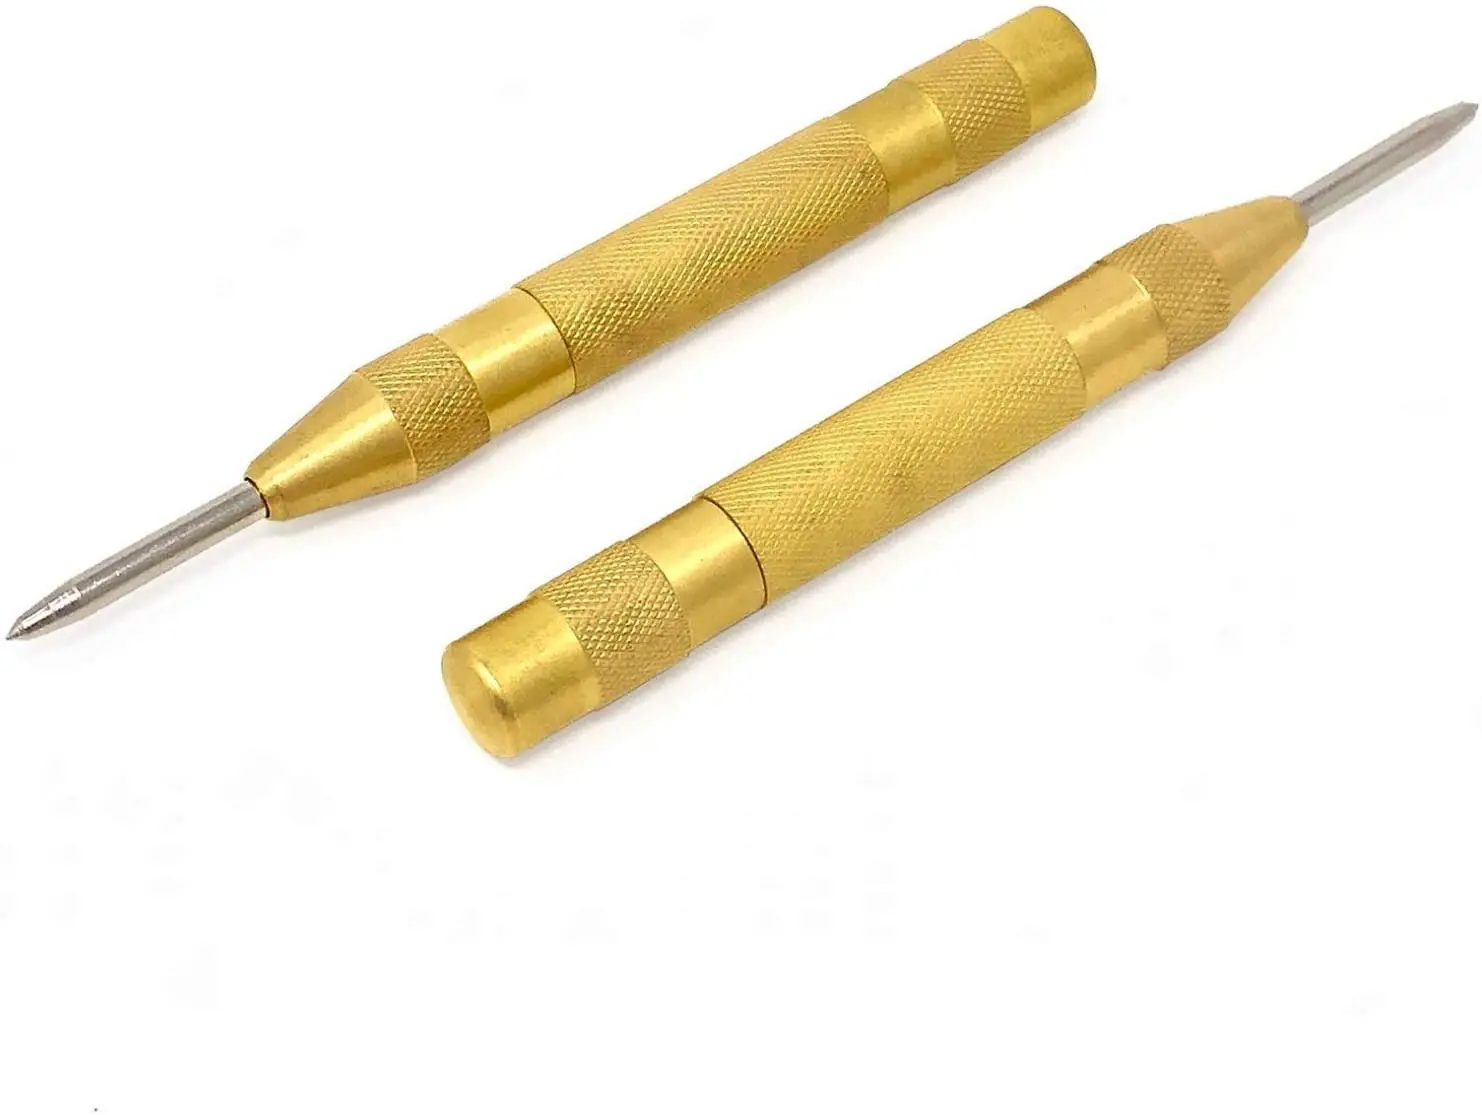 

2pcs/set Center Punch - 5 inch Brass Spring Loaded Center Hole Punch with Adjustable Tension, Hand Tool for Metal or Wood